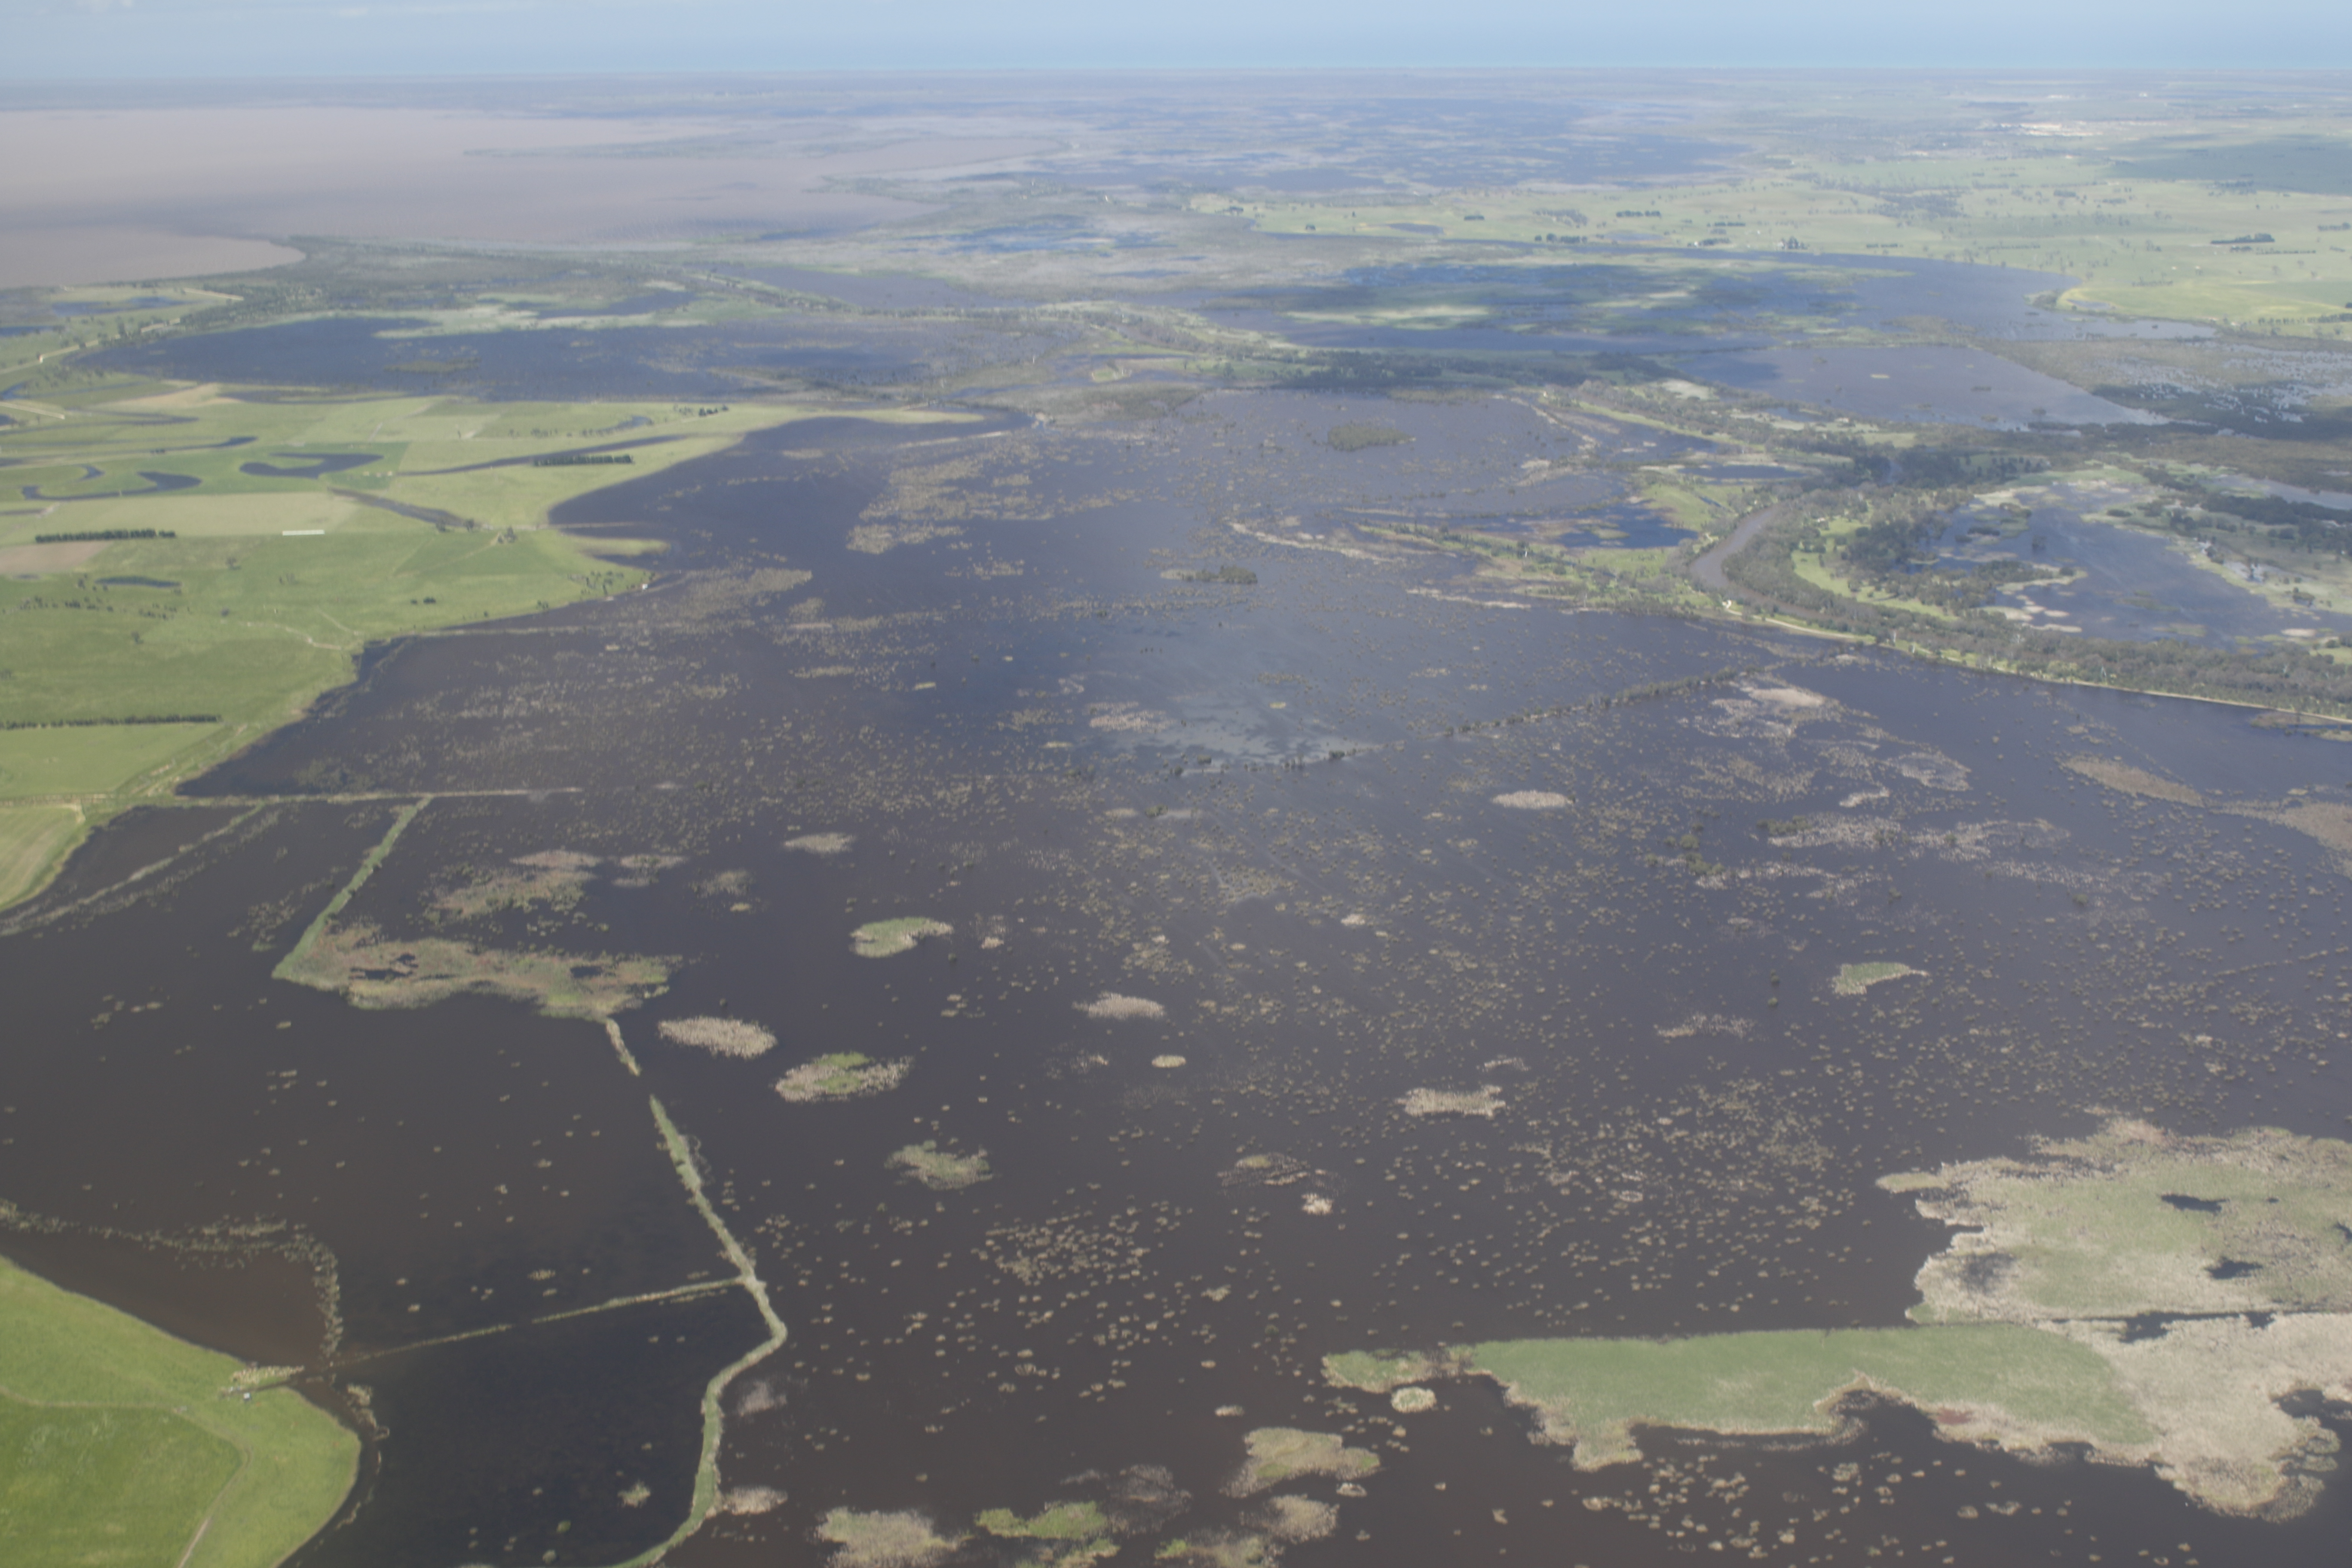 Flying over the Gippsland Lakes on our way south to Survey Band 1